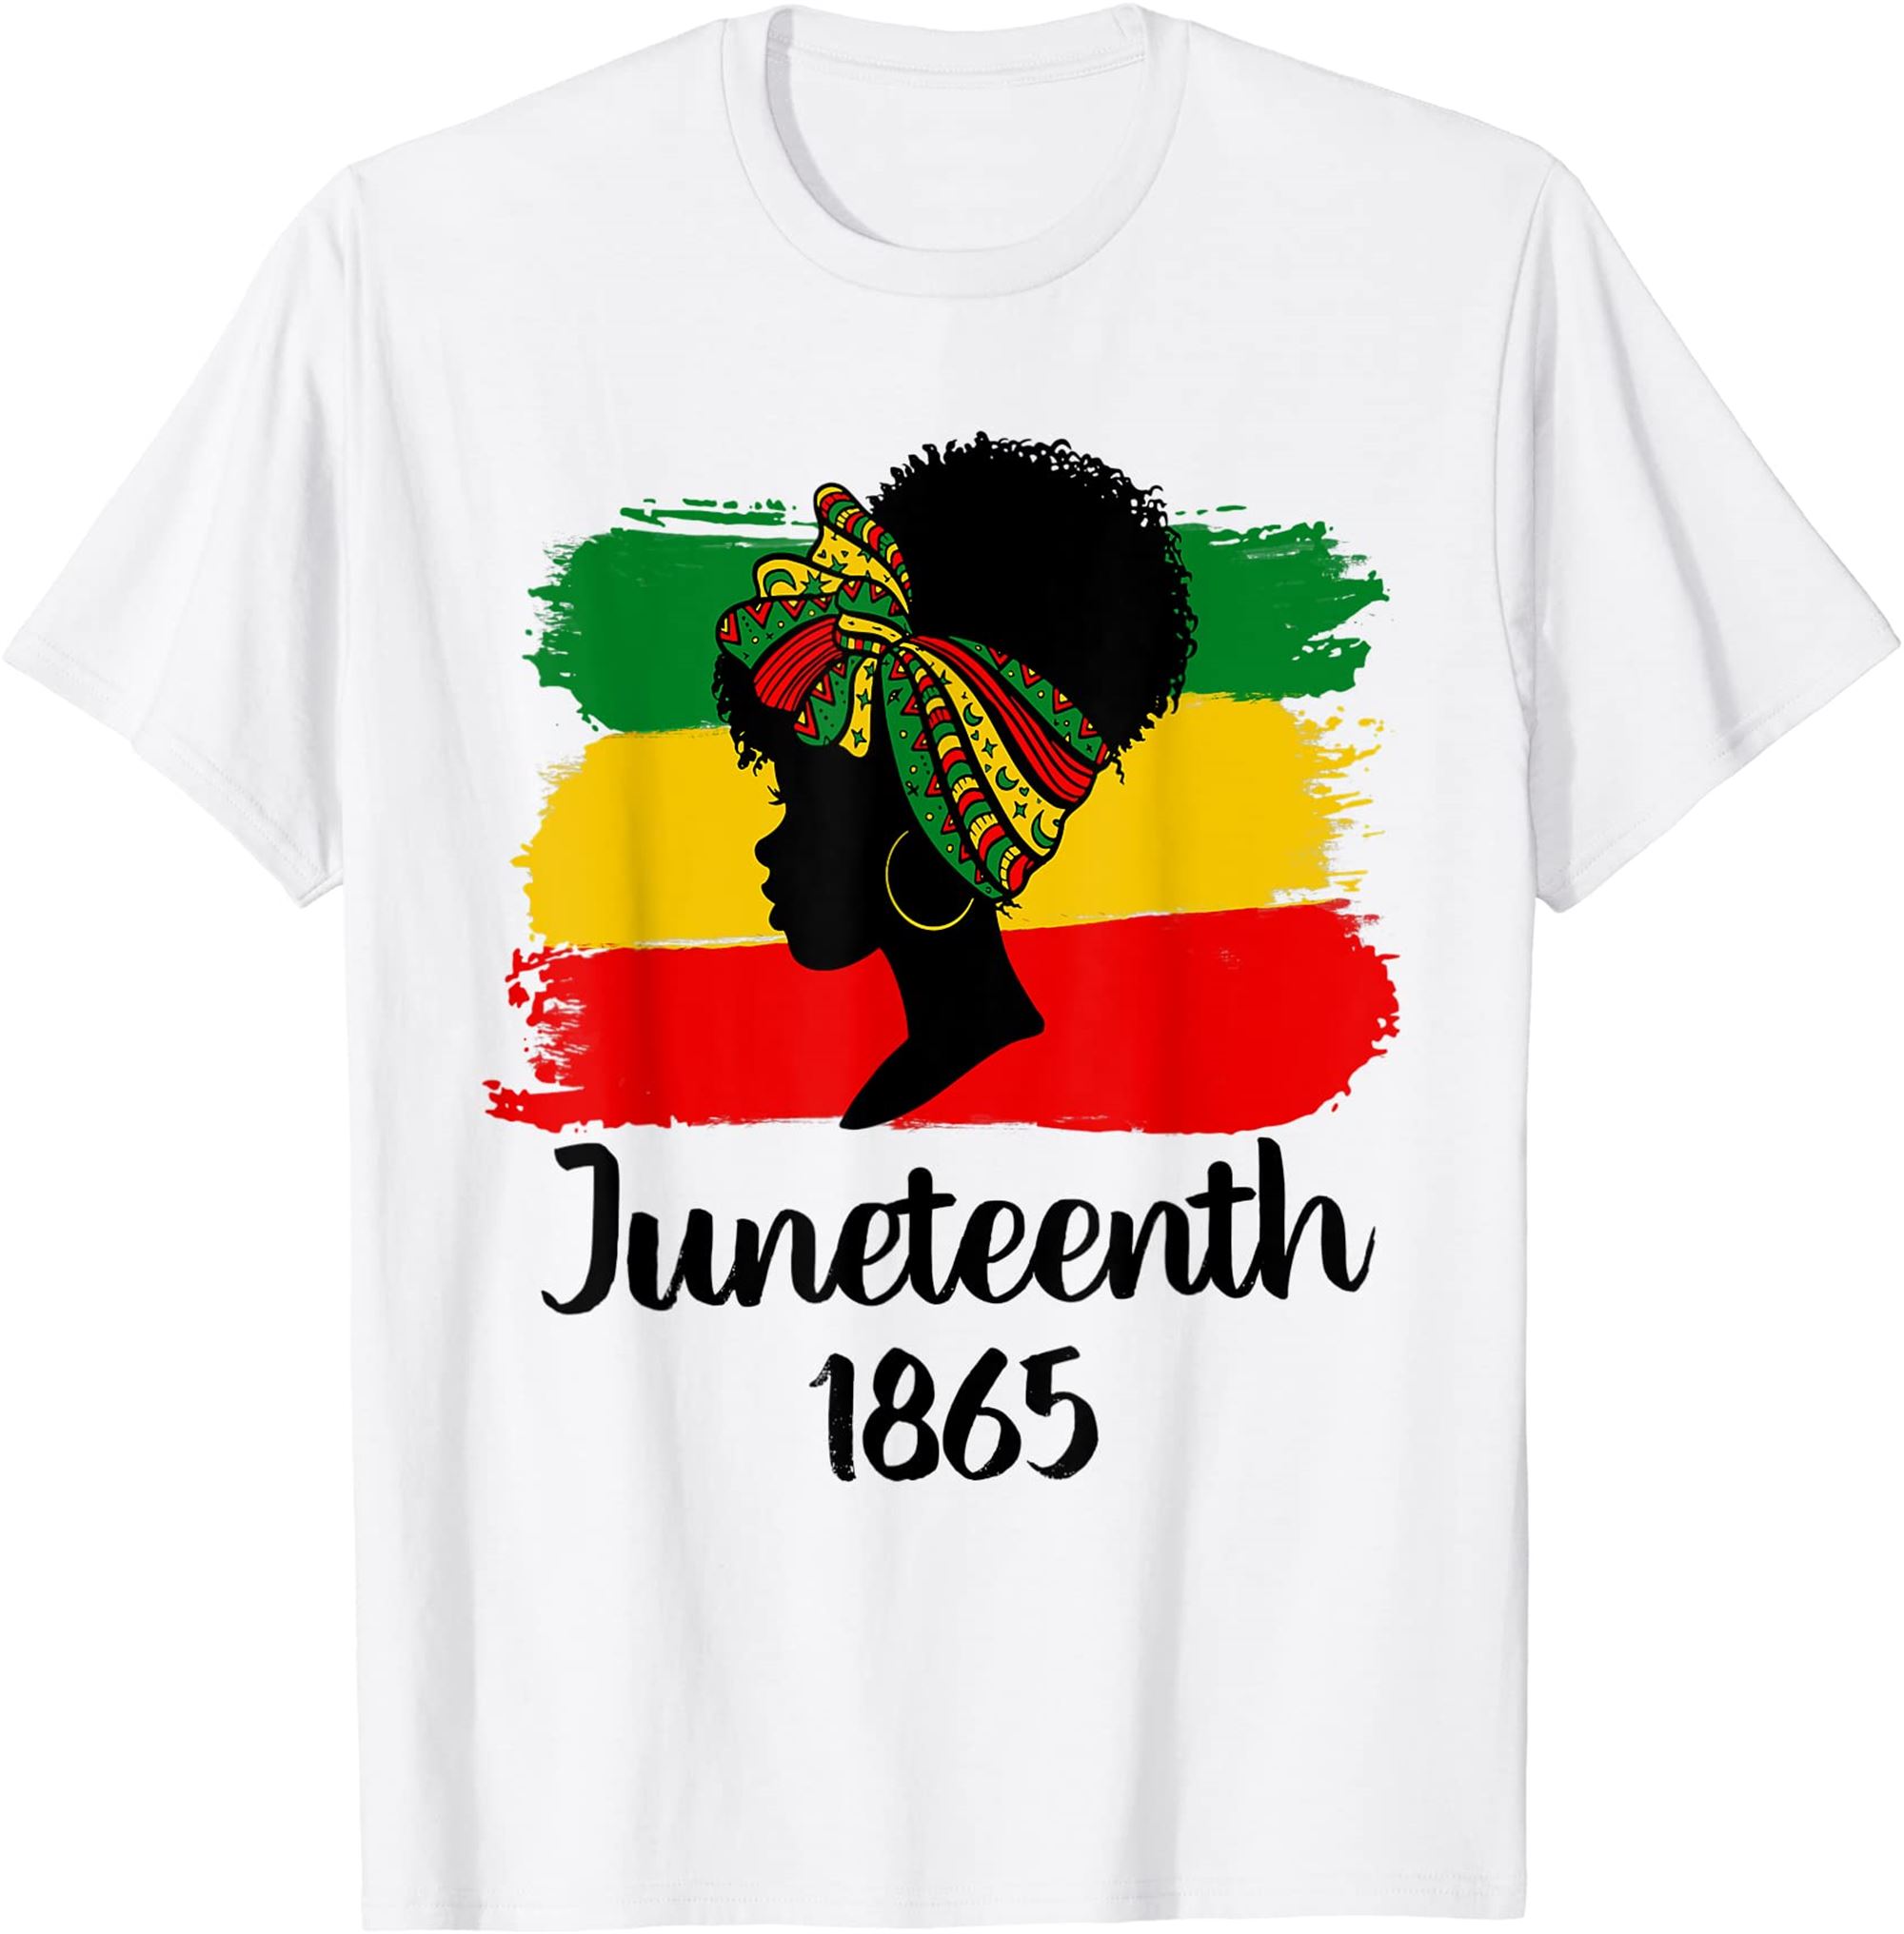 Juneteenth Is My Independence Day Black Women Black Pride T-shirt Plus Size Up To 5xl